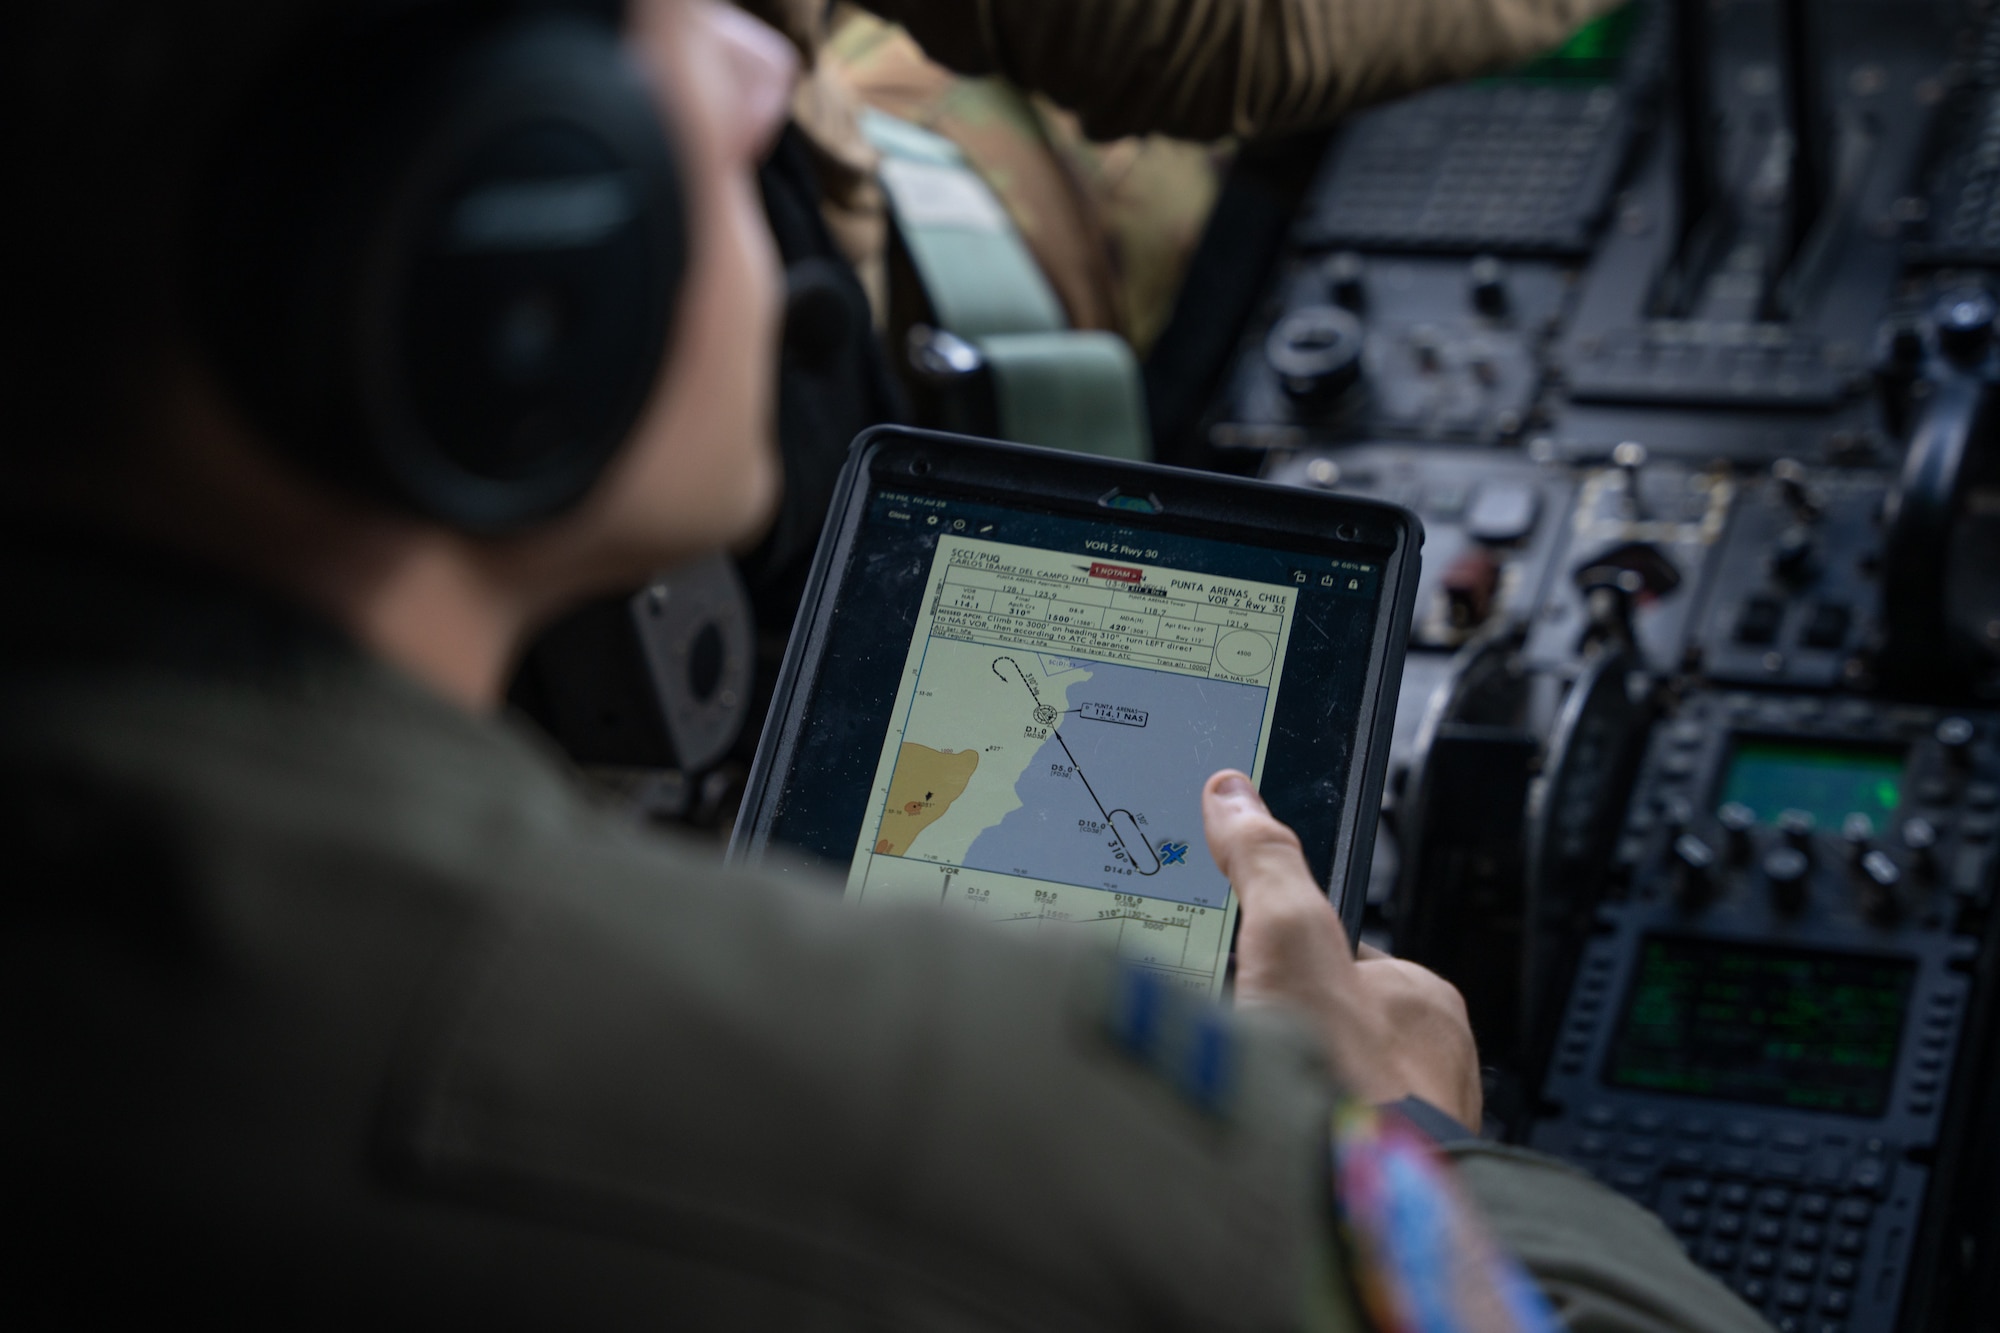 A C-130J Super Hercules pilot from the 39th Airlift Squadron out of the 317th Airlift Wing, Dyess AFB, TX reads the landing chart for Punta Arenas, Chile while the crew flies south of Santiago, Chile, July 28, 2023, during exercise Southern Star 23. Exercise Southern Star 23 is a Chilean-led full-scale Special Operations, Joint, and Combined Employment Exercise. The training consists of staff planning, tactical maneuvers, and collaboration among SOUTHCOM components’ staff, Chilean Armed Forces, and interagency partners during a stabilization scenario which facilitates the opportunity for participants to execute and assess the staff’s ability to plan, coordinate and execute command and control, logistical support, and decision-making processes in a crisis scenario. (U.S. Air Force photo by Staff Sgt. Clayton Wear)